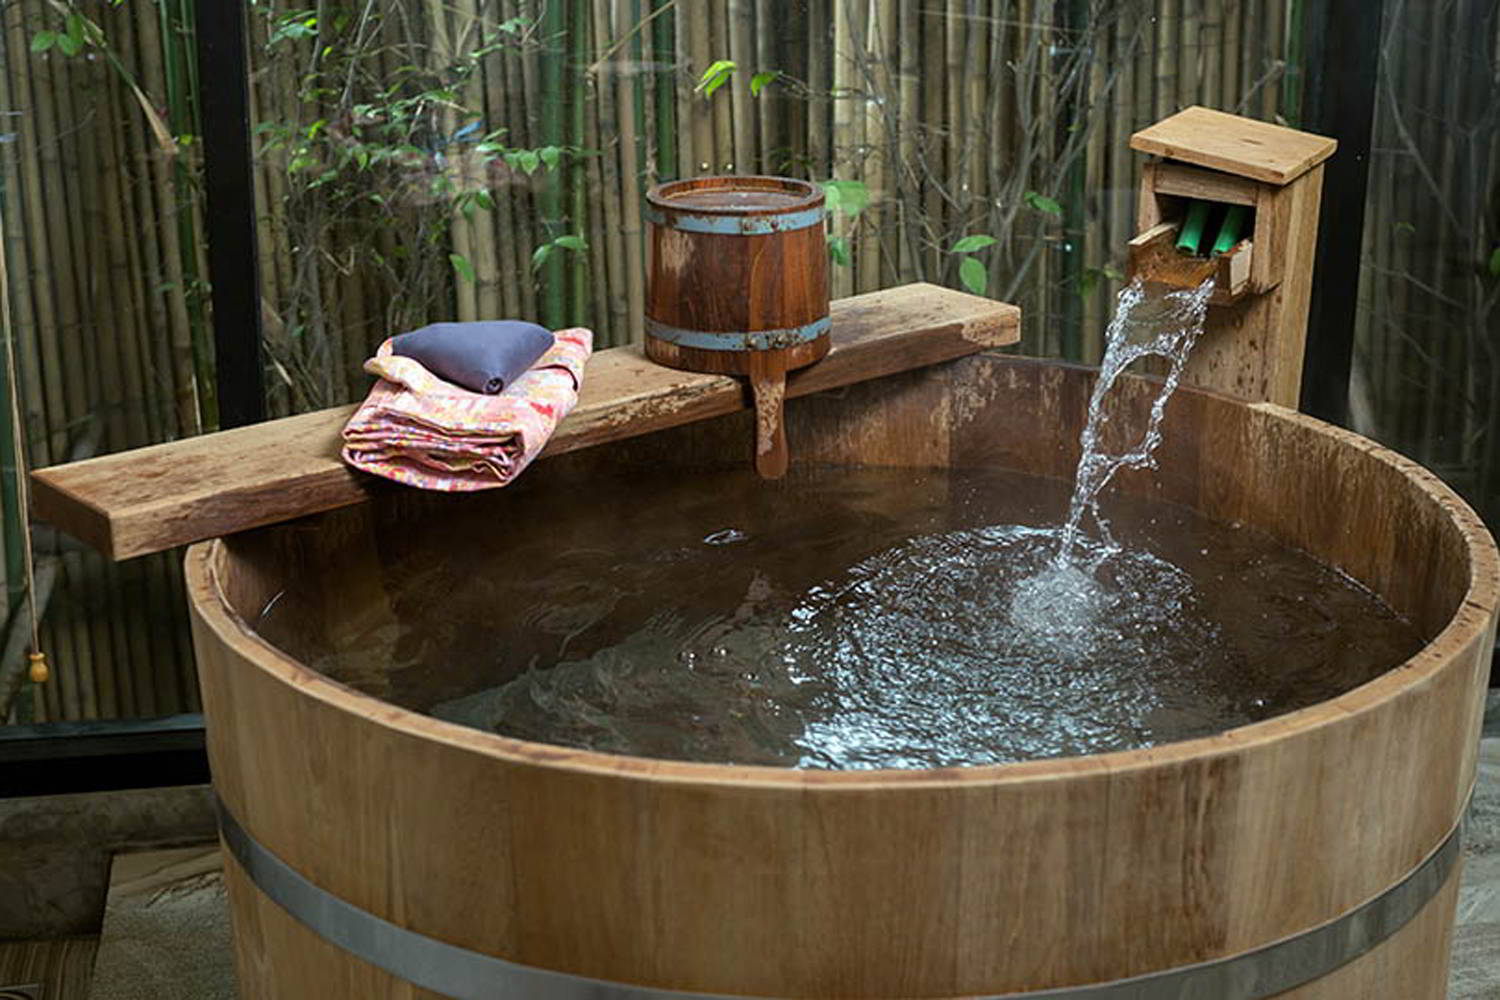 Ofuro: Well-Being of Body, Mind, and Spirit  Through Japanese Bathing Rituals